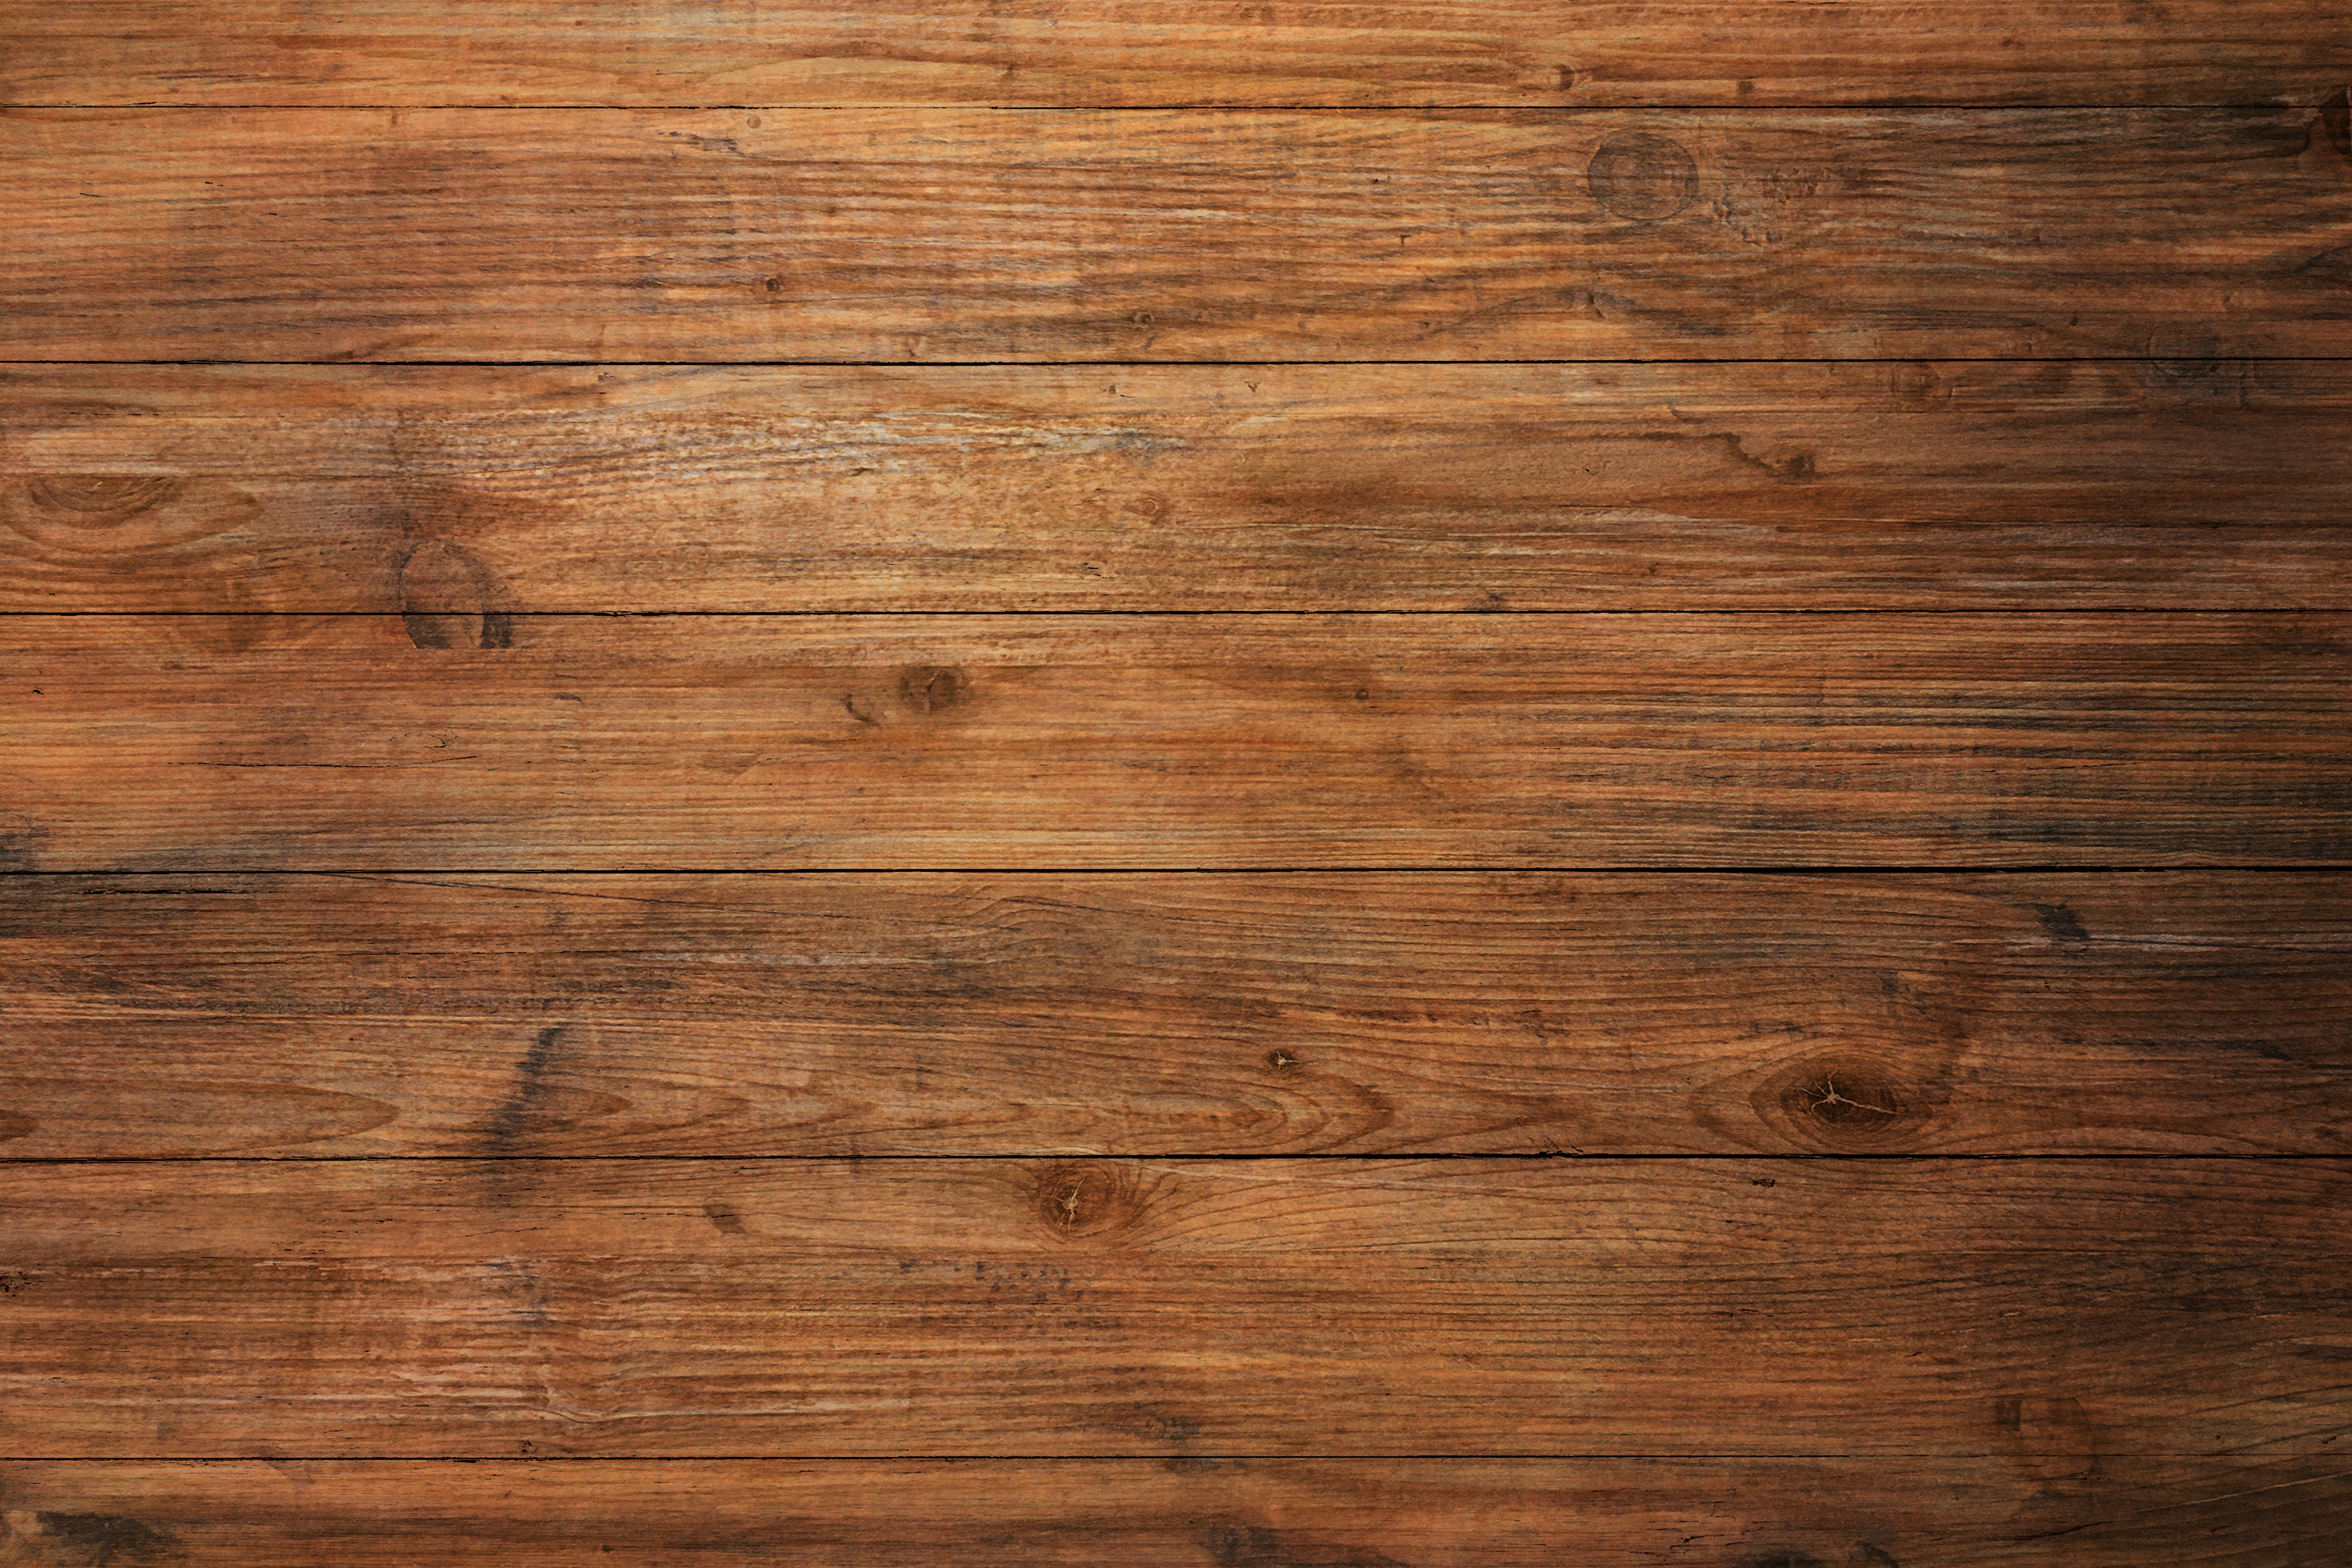 brown-wood-texture-dark-wooden-abstract-background-southland-realtors